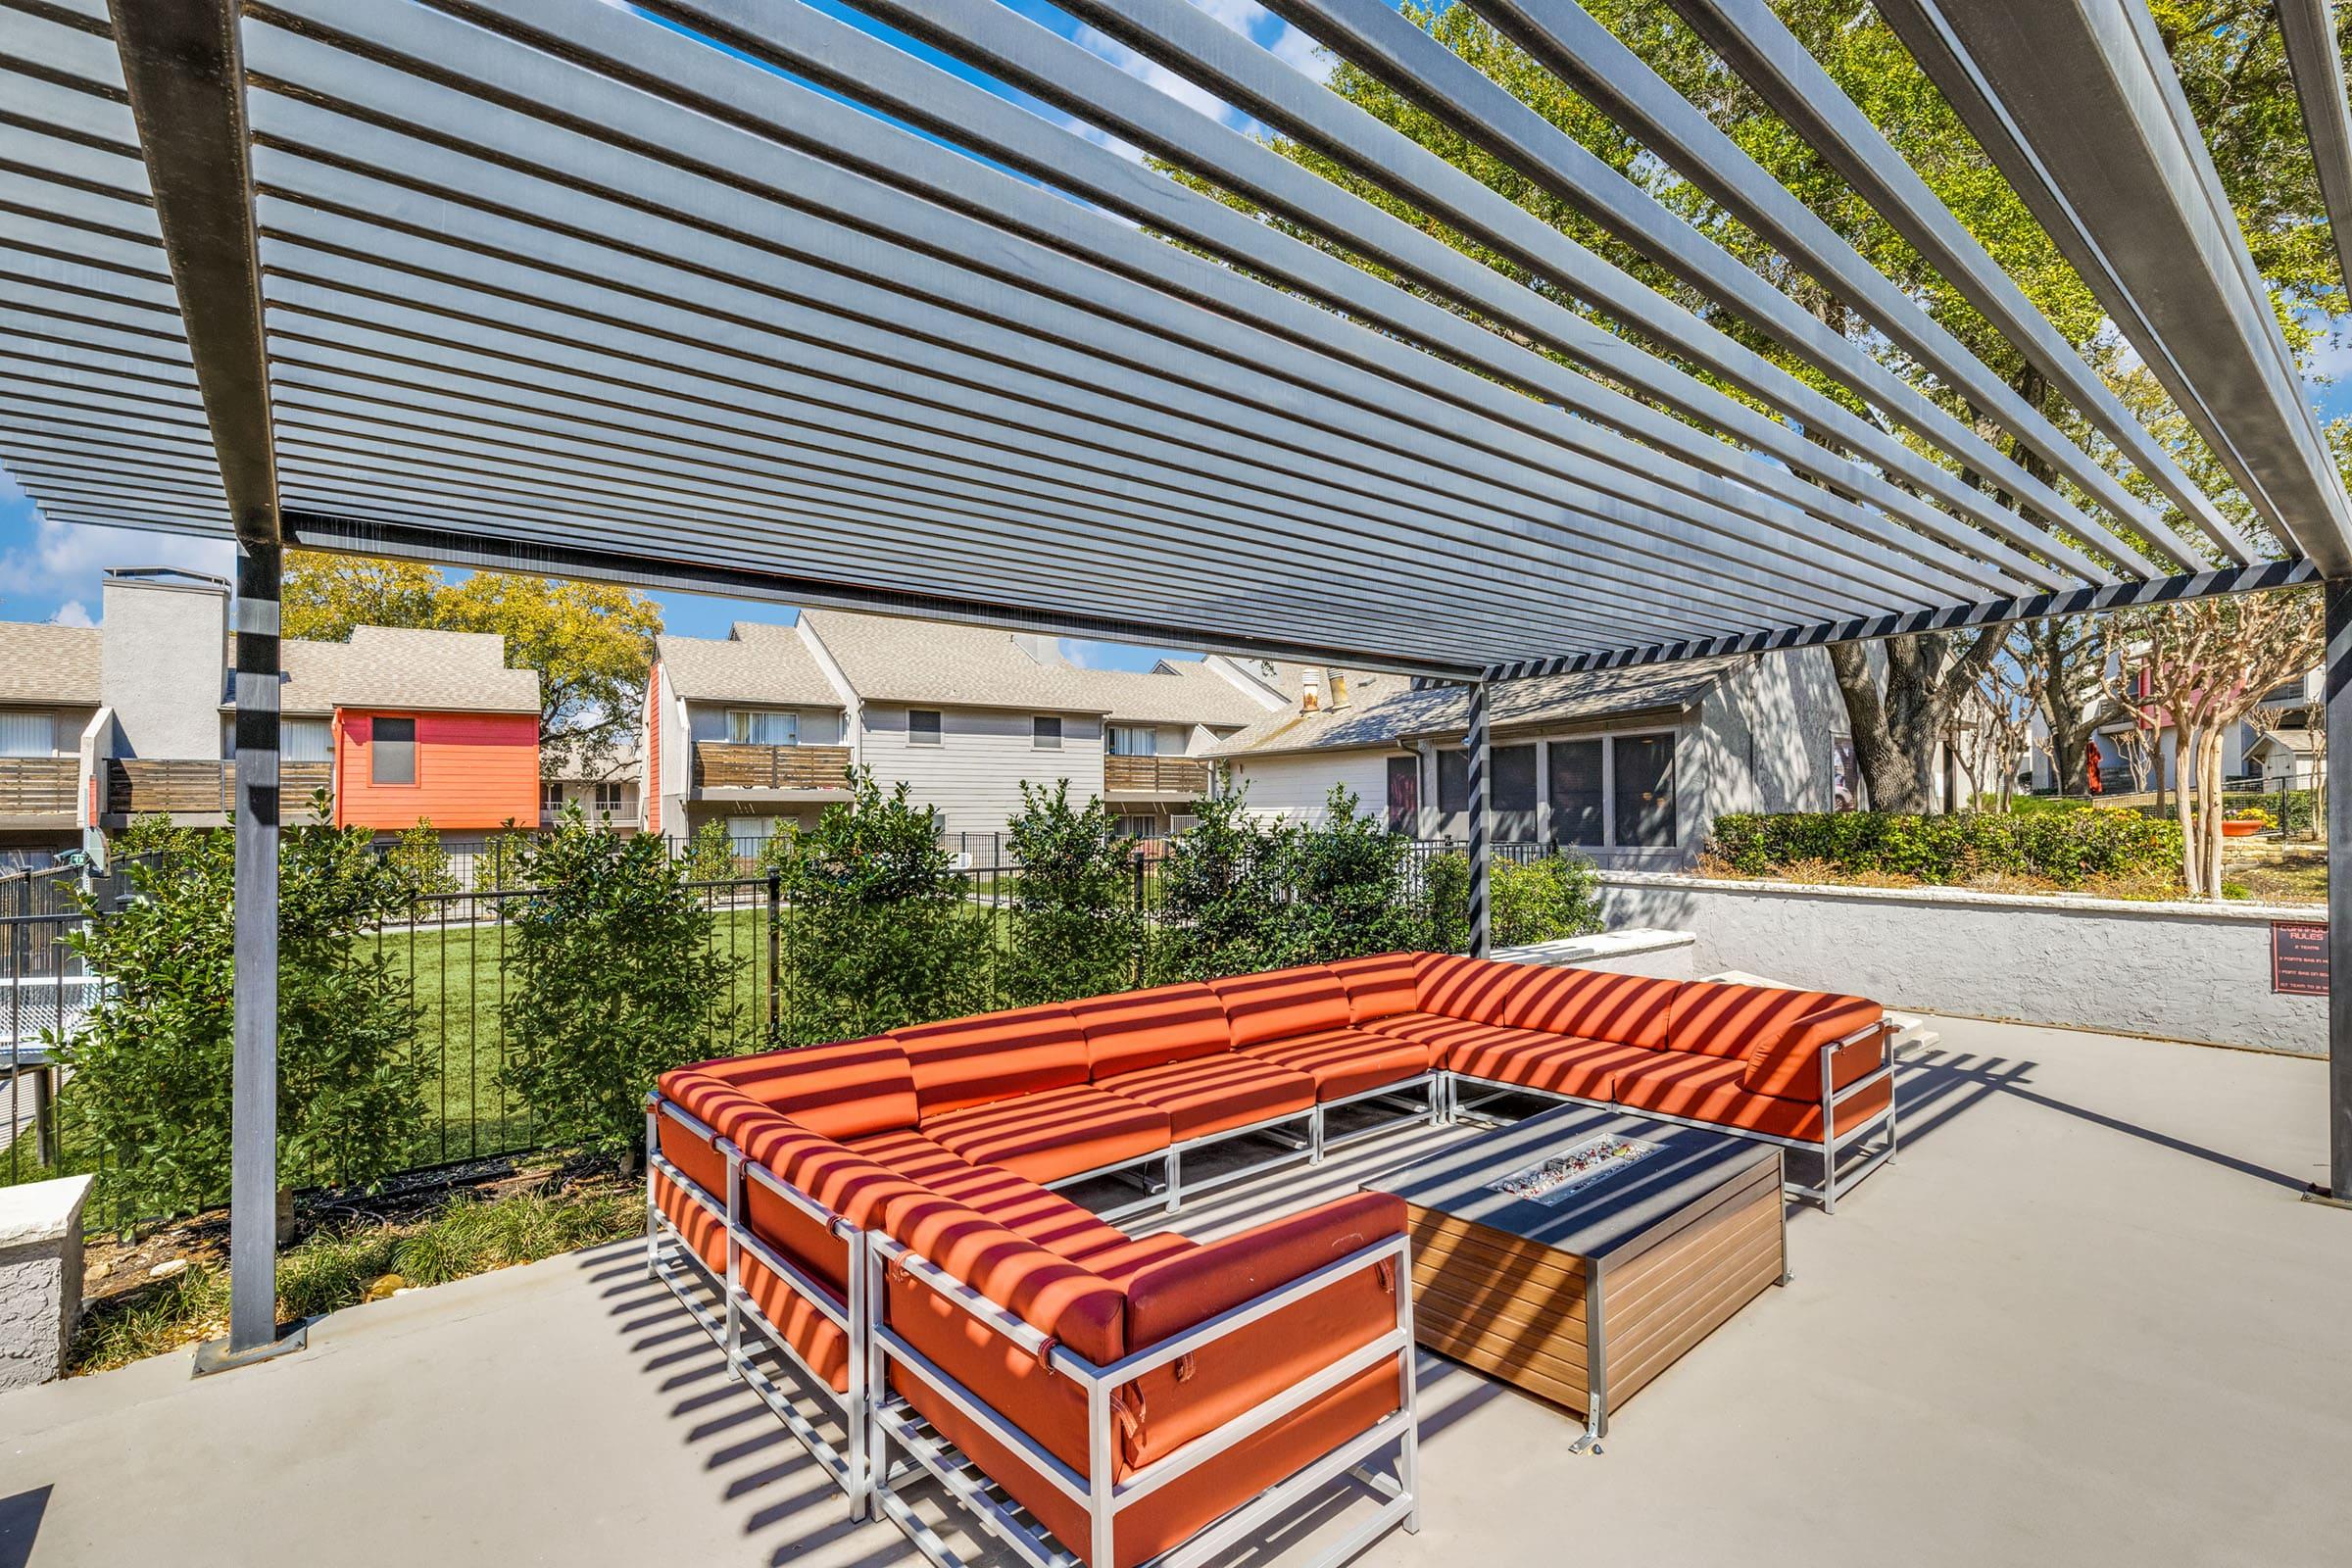 an orange bench in front of a building